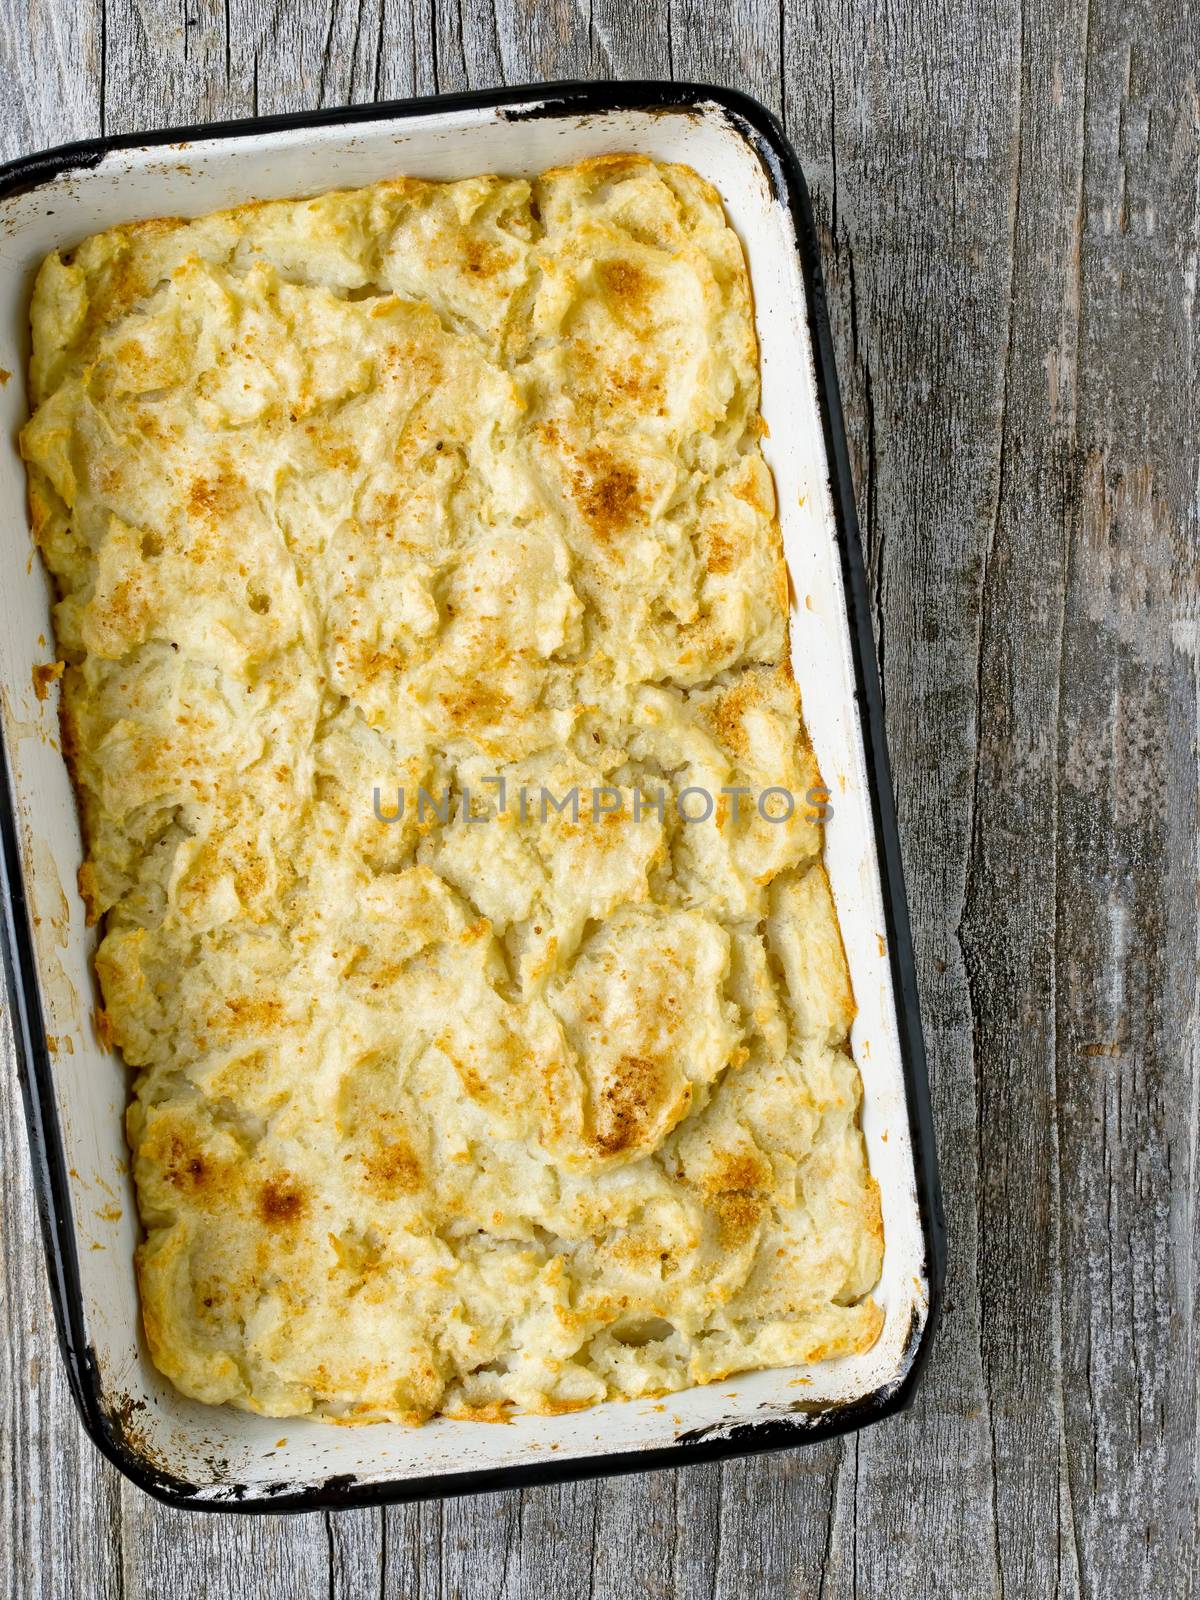 rustic english fish pie by zkruger